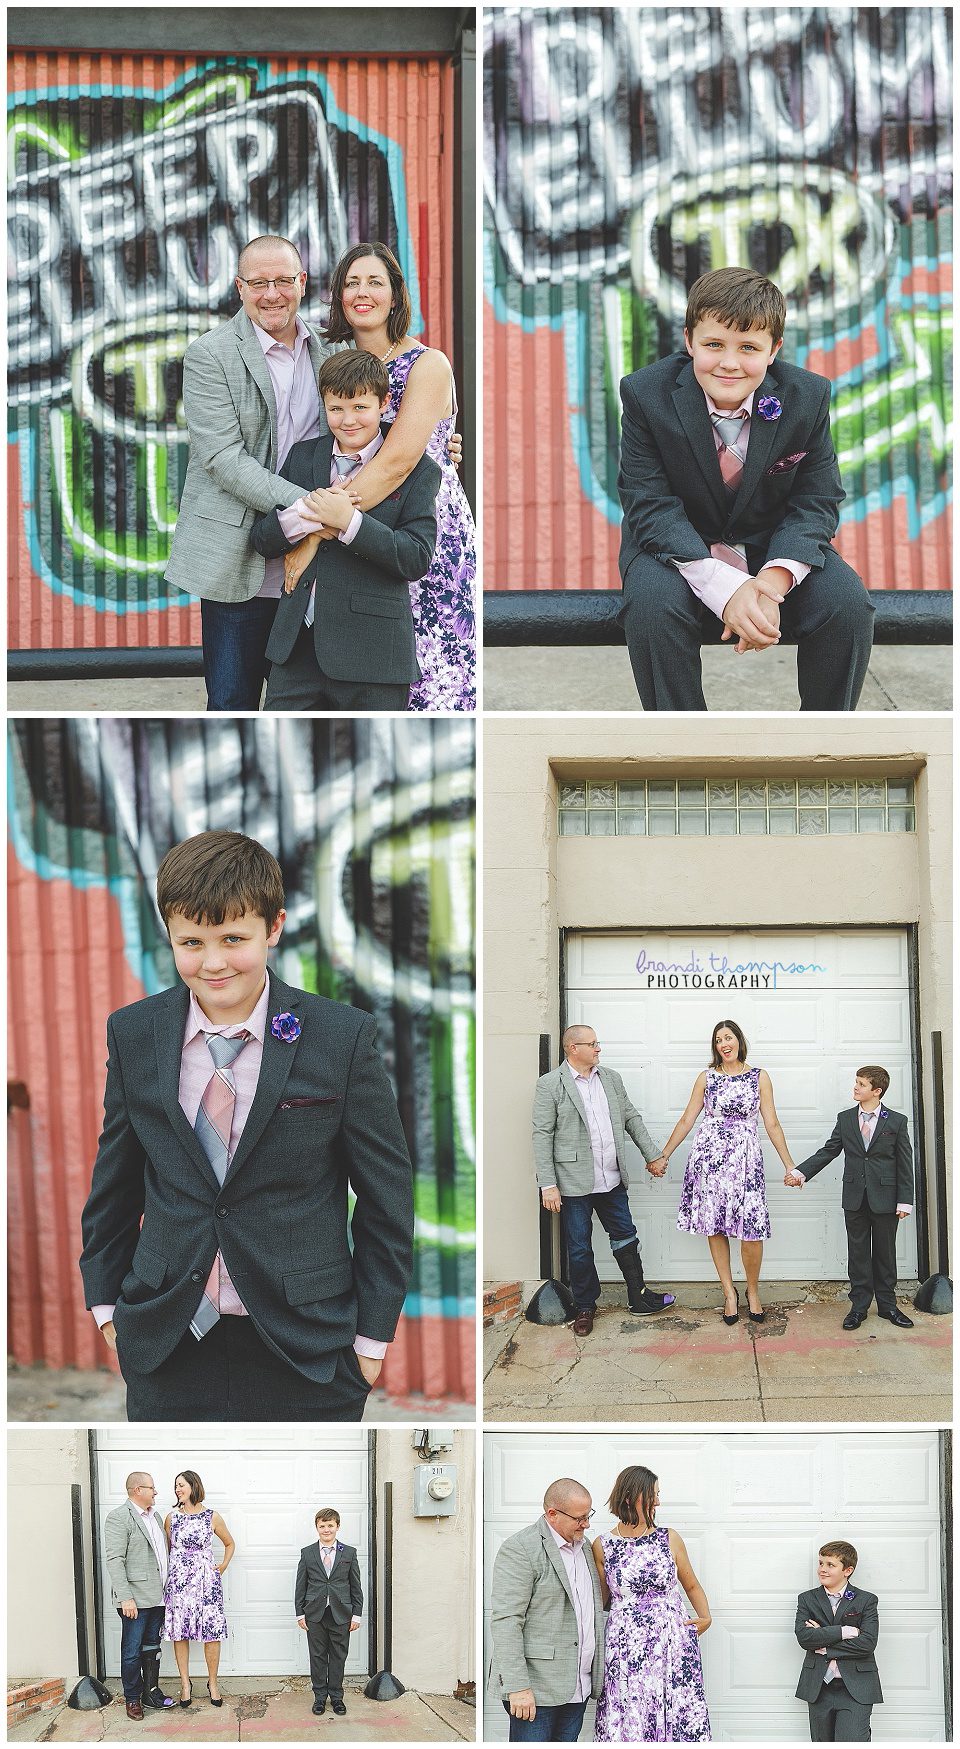 Urban family session in deep ellum, tx with mom, dad and elementary age son